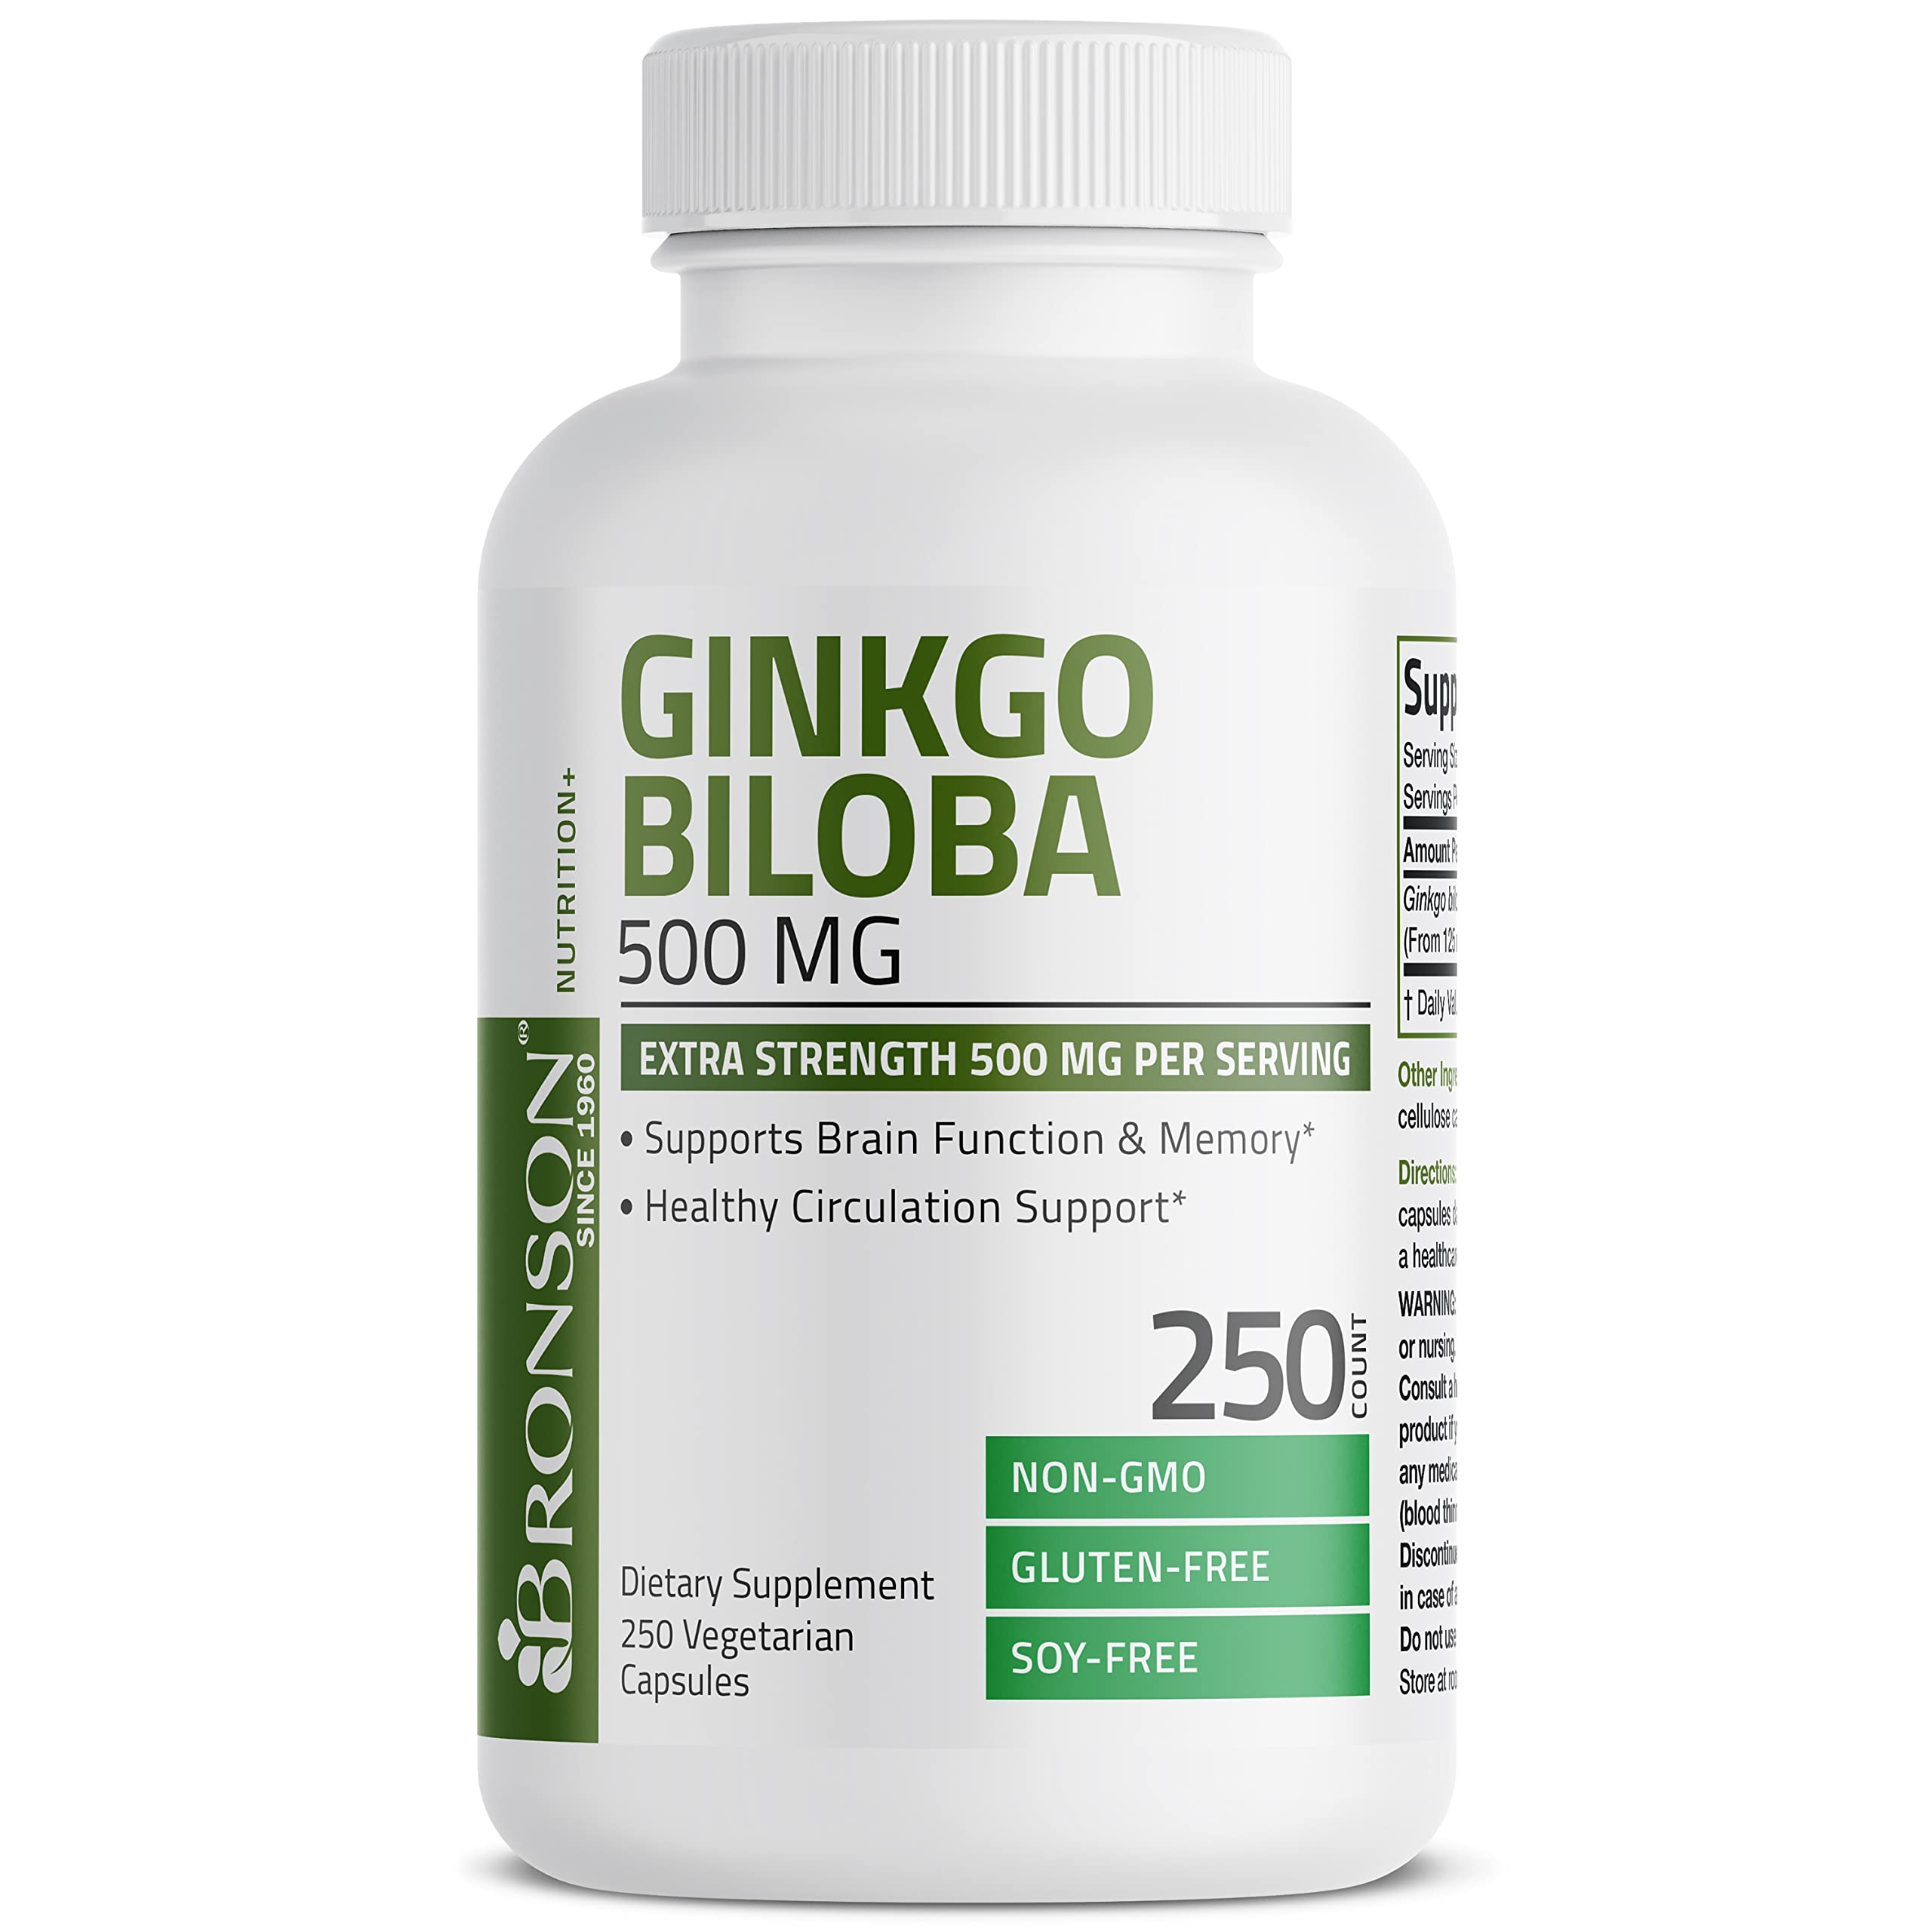 Bronson Ginkgo Biloba 500mg Extra Strength 500mg per Serving - Supports Brain Function & Memory Support, 250 Vegetarian Capsules